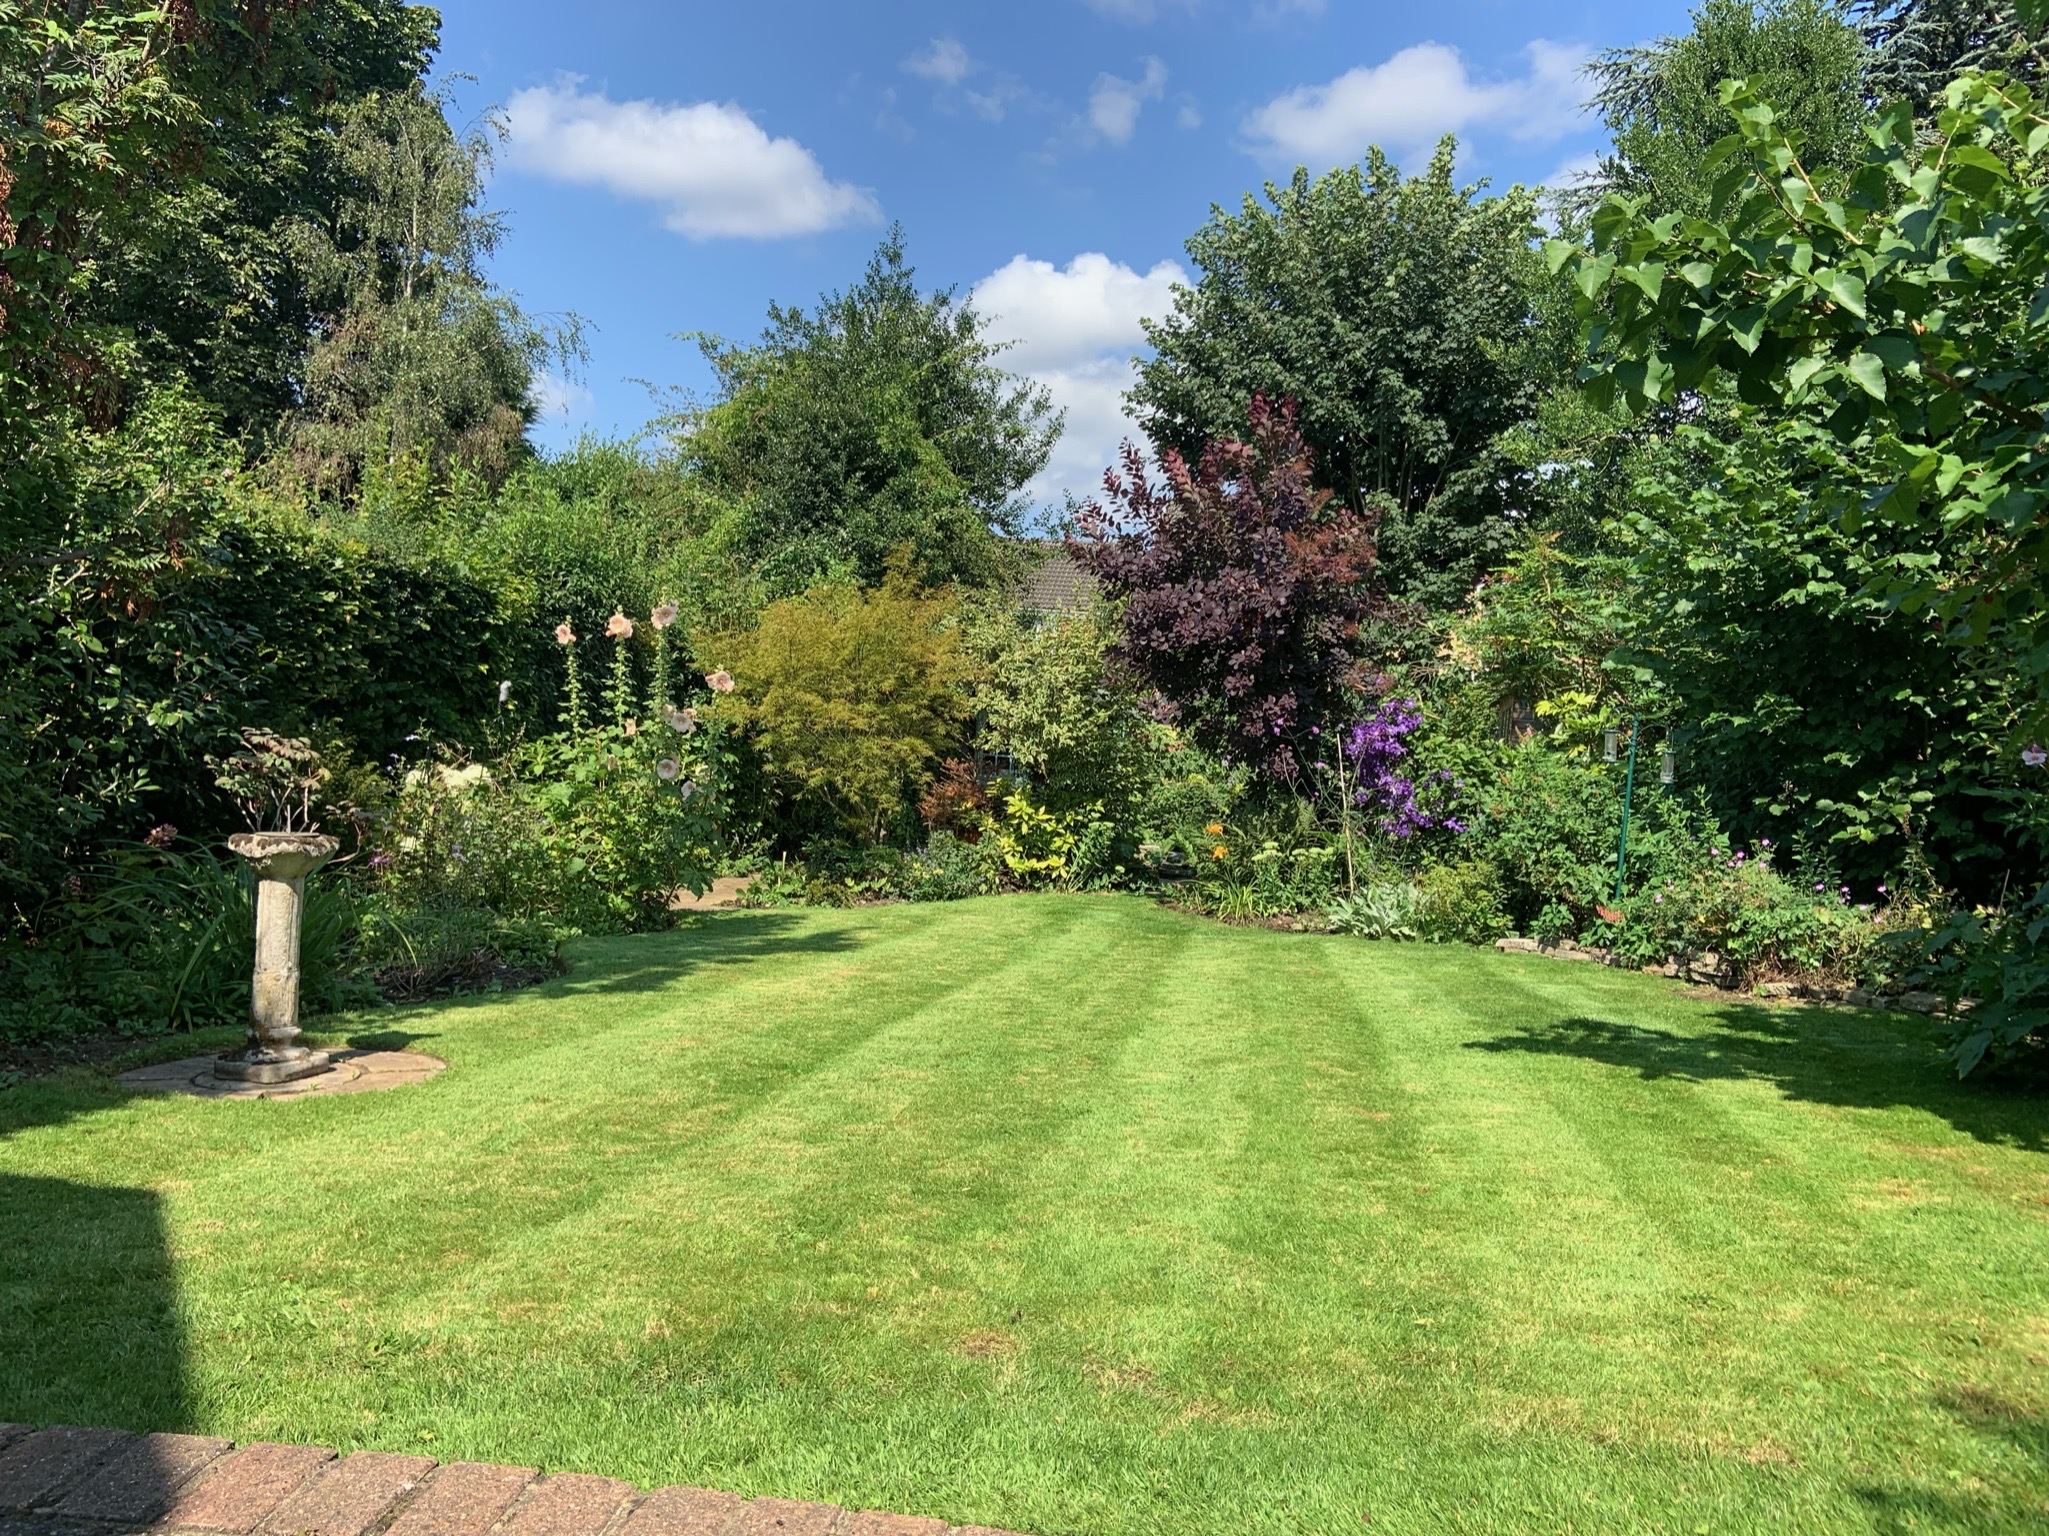 A well maintained garden lawn in the sun surrounded by trees and bushes